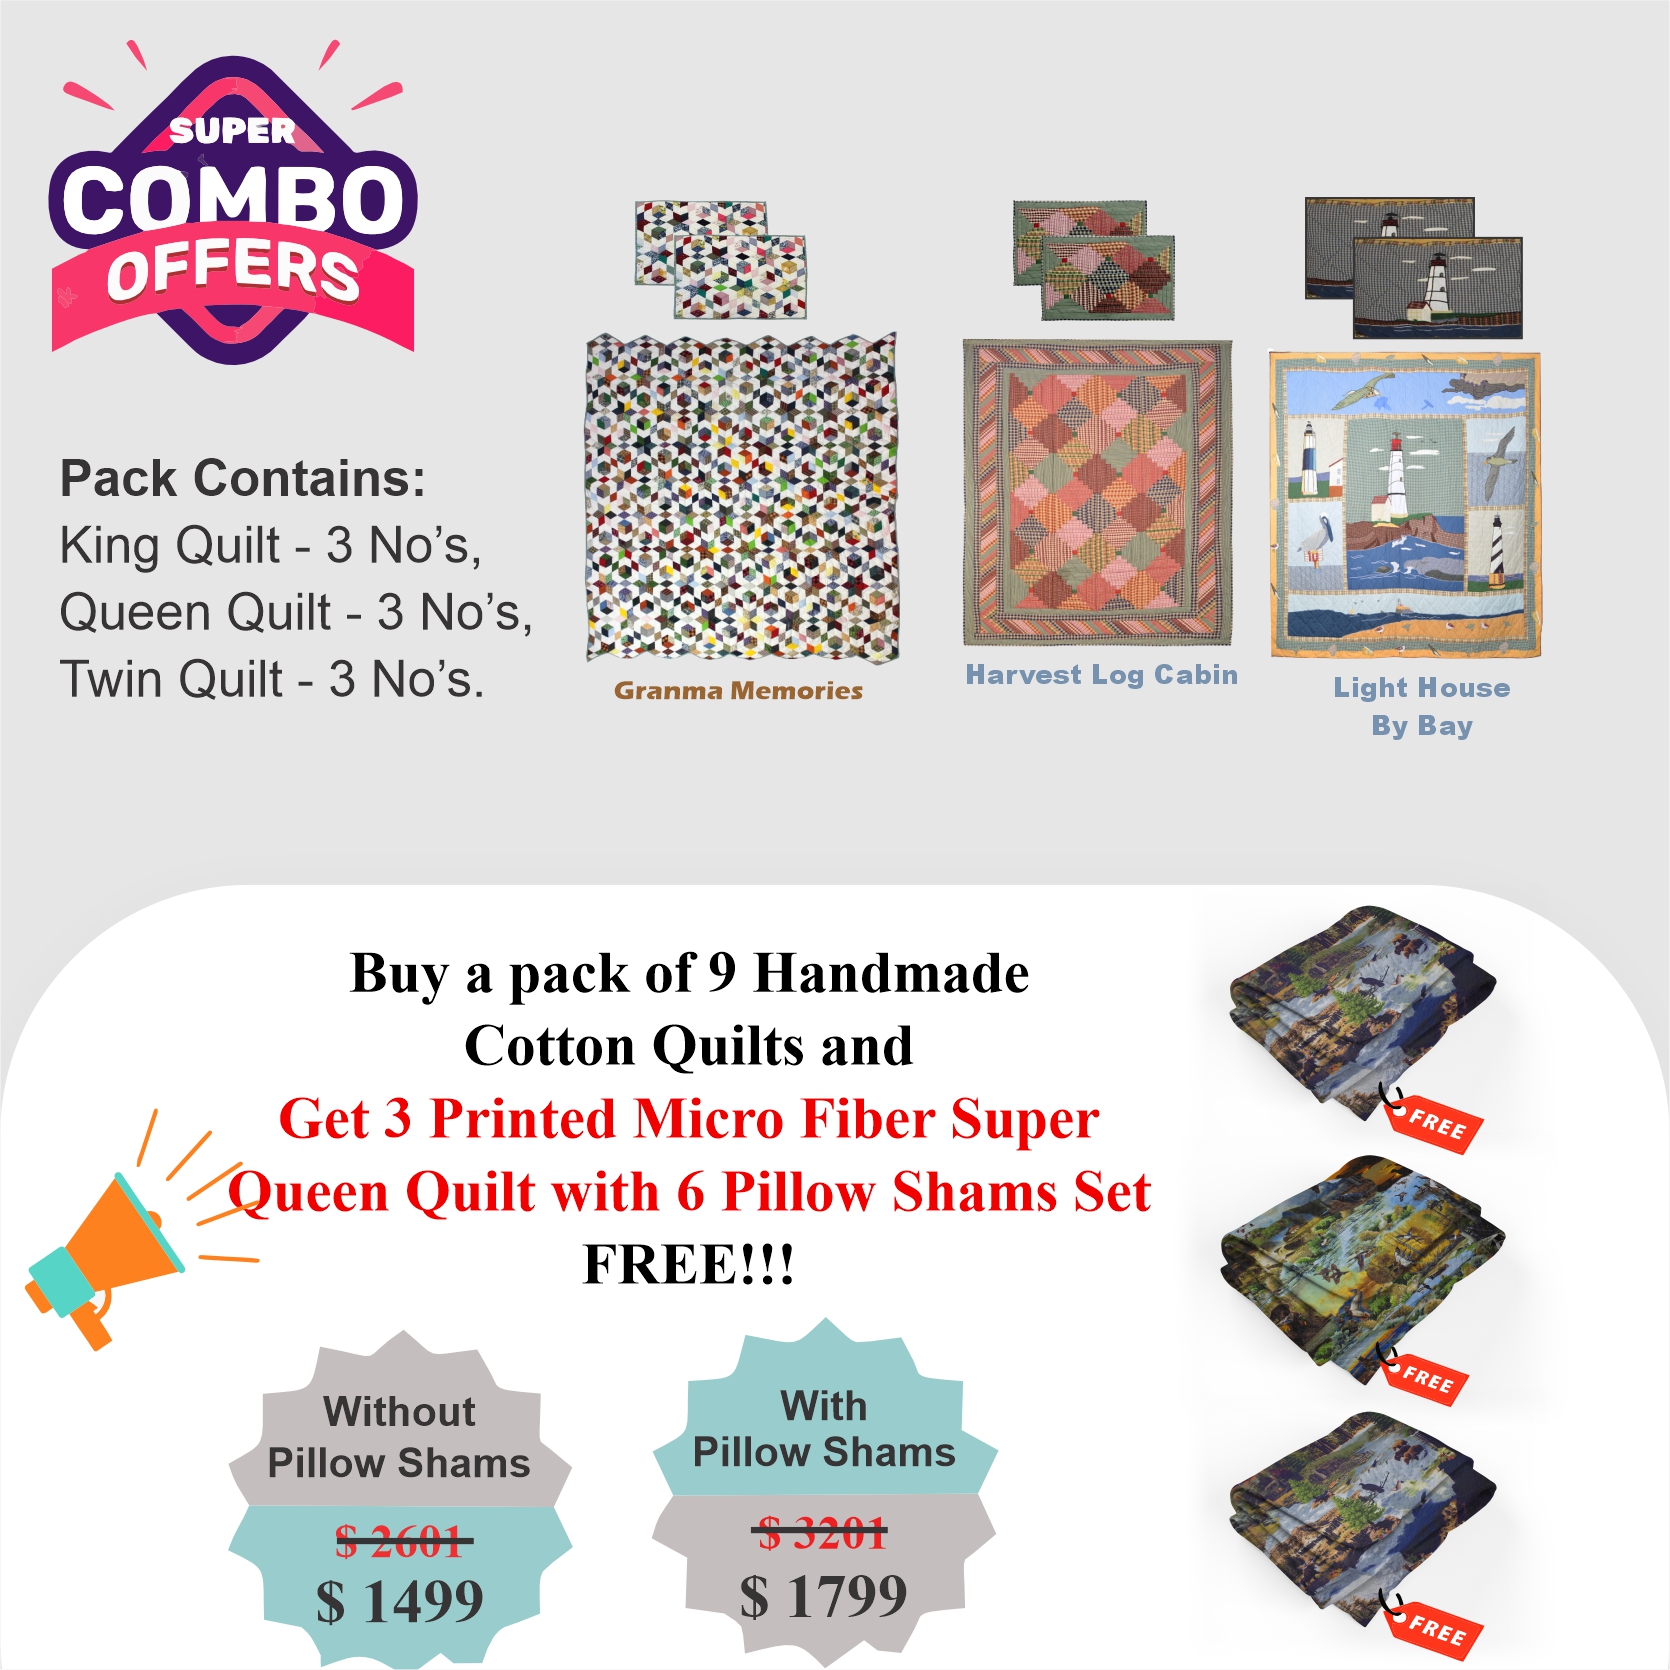 Granma Memory /Harvest Log Cabin/ Light house - Pack of 9 handmade cotton quilts | Buy 9 cotton quilts and get 3 Printed Microfiber Super Queen Quilt with 3 Shams set FREE!!!